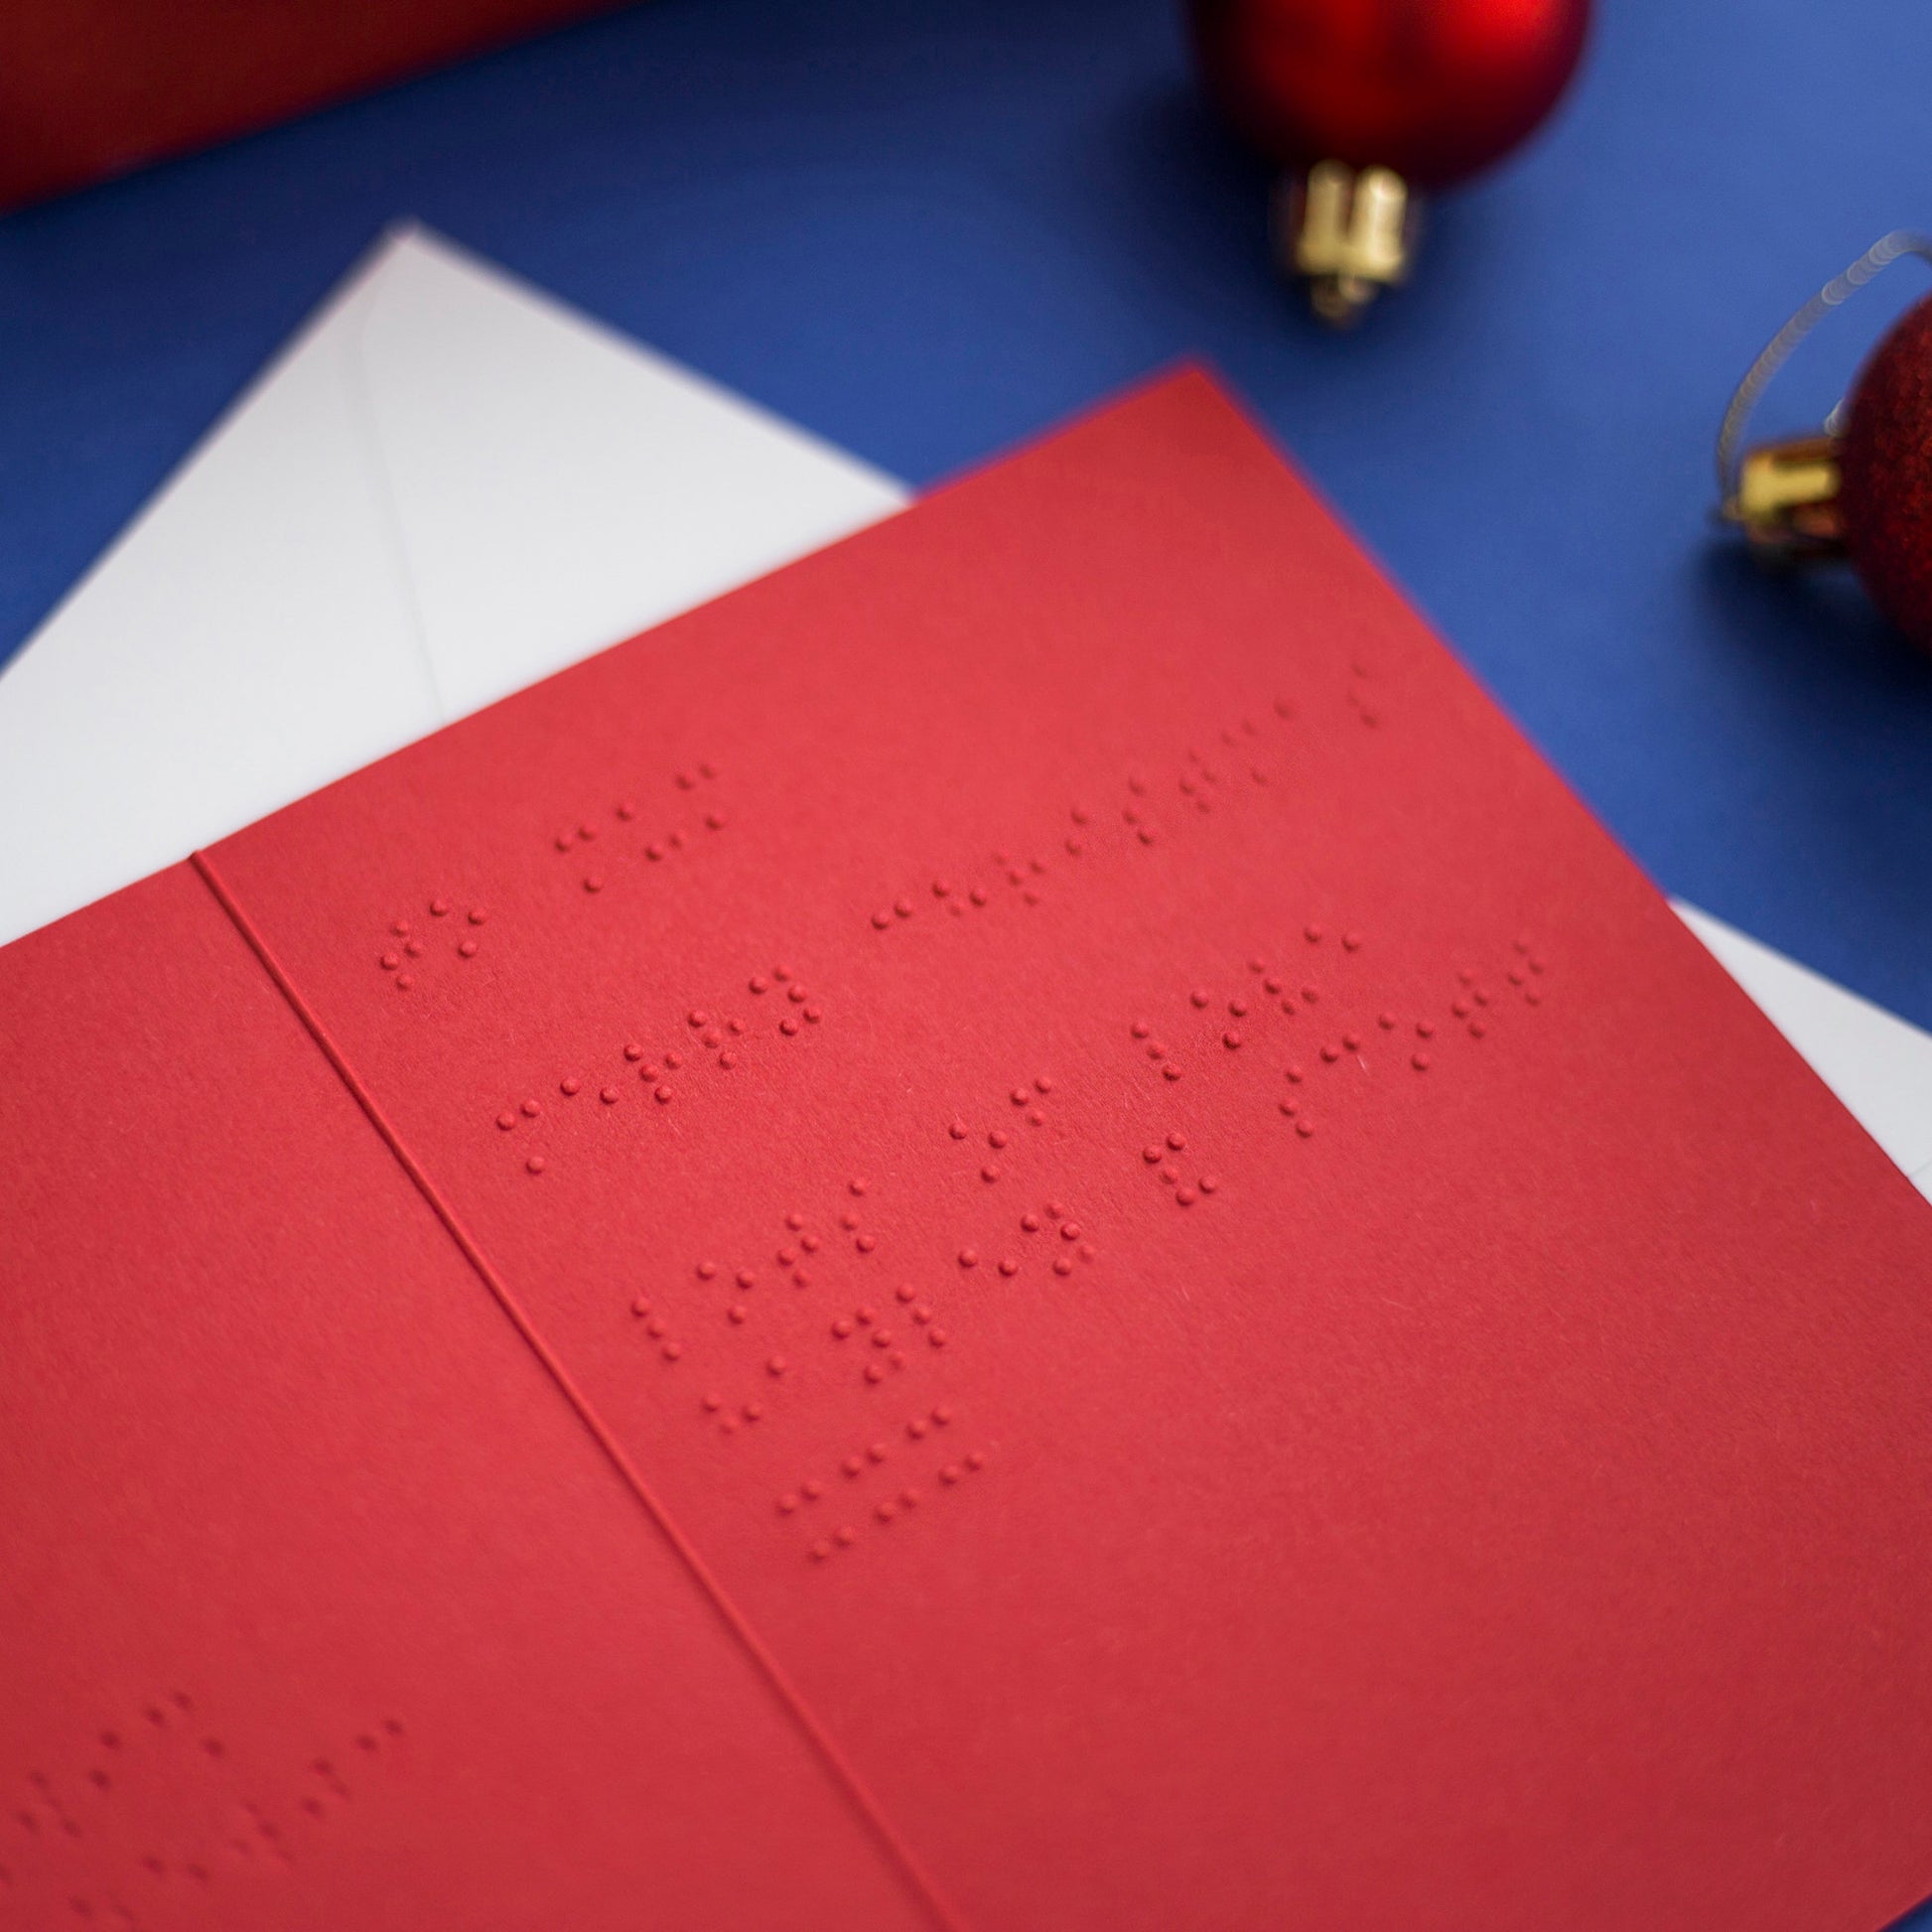 An open red Christmas card with braille inside, lay on a white envelope